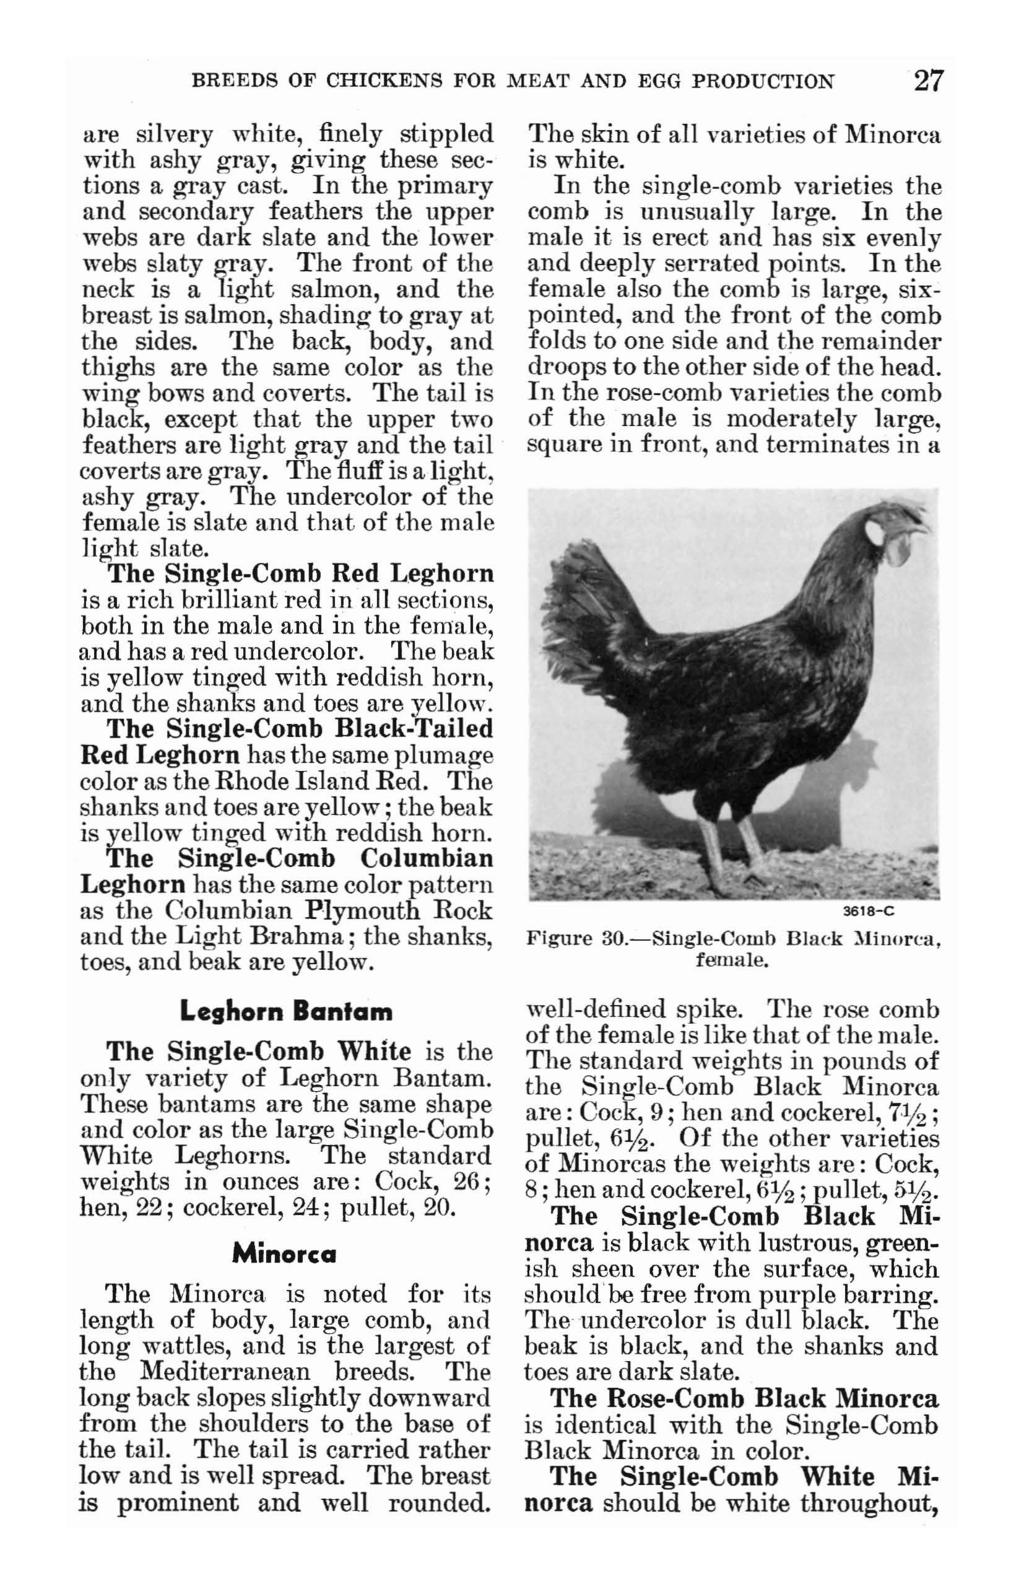 BREEDS OF CHICKENS FOR MEAT AND EGG PRODUCTION 27 are silvery white, finely stippled with ashy gray, giving these sections a gray cast.